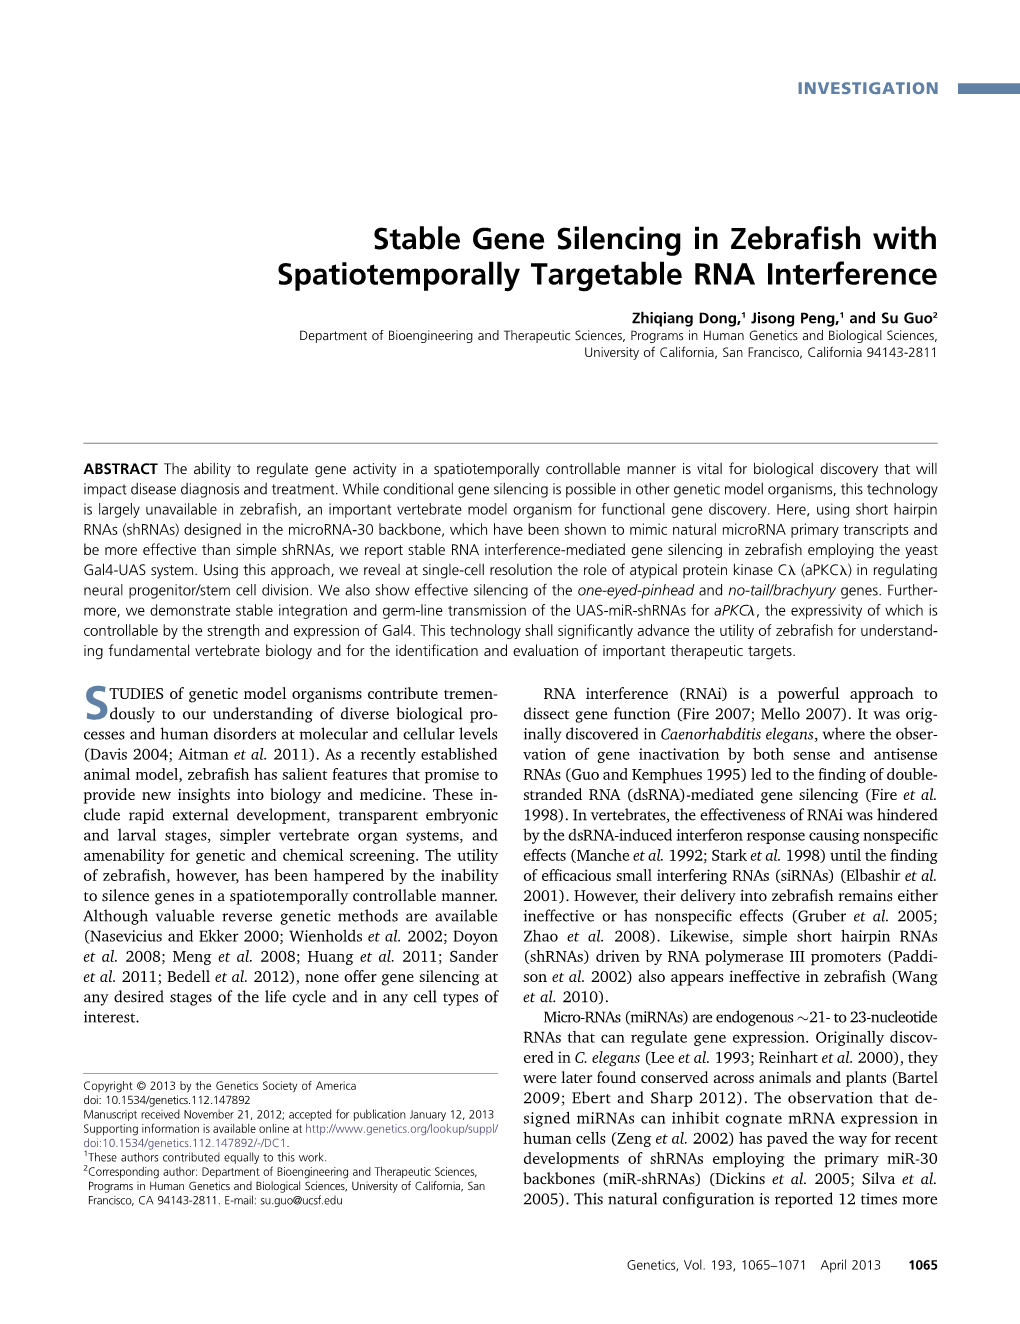 Stable Gene Silencing in Zebrafish with Spatiotemporally Targetable RNA Interference